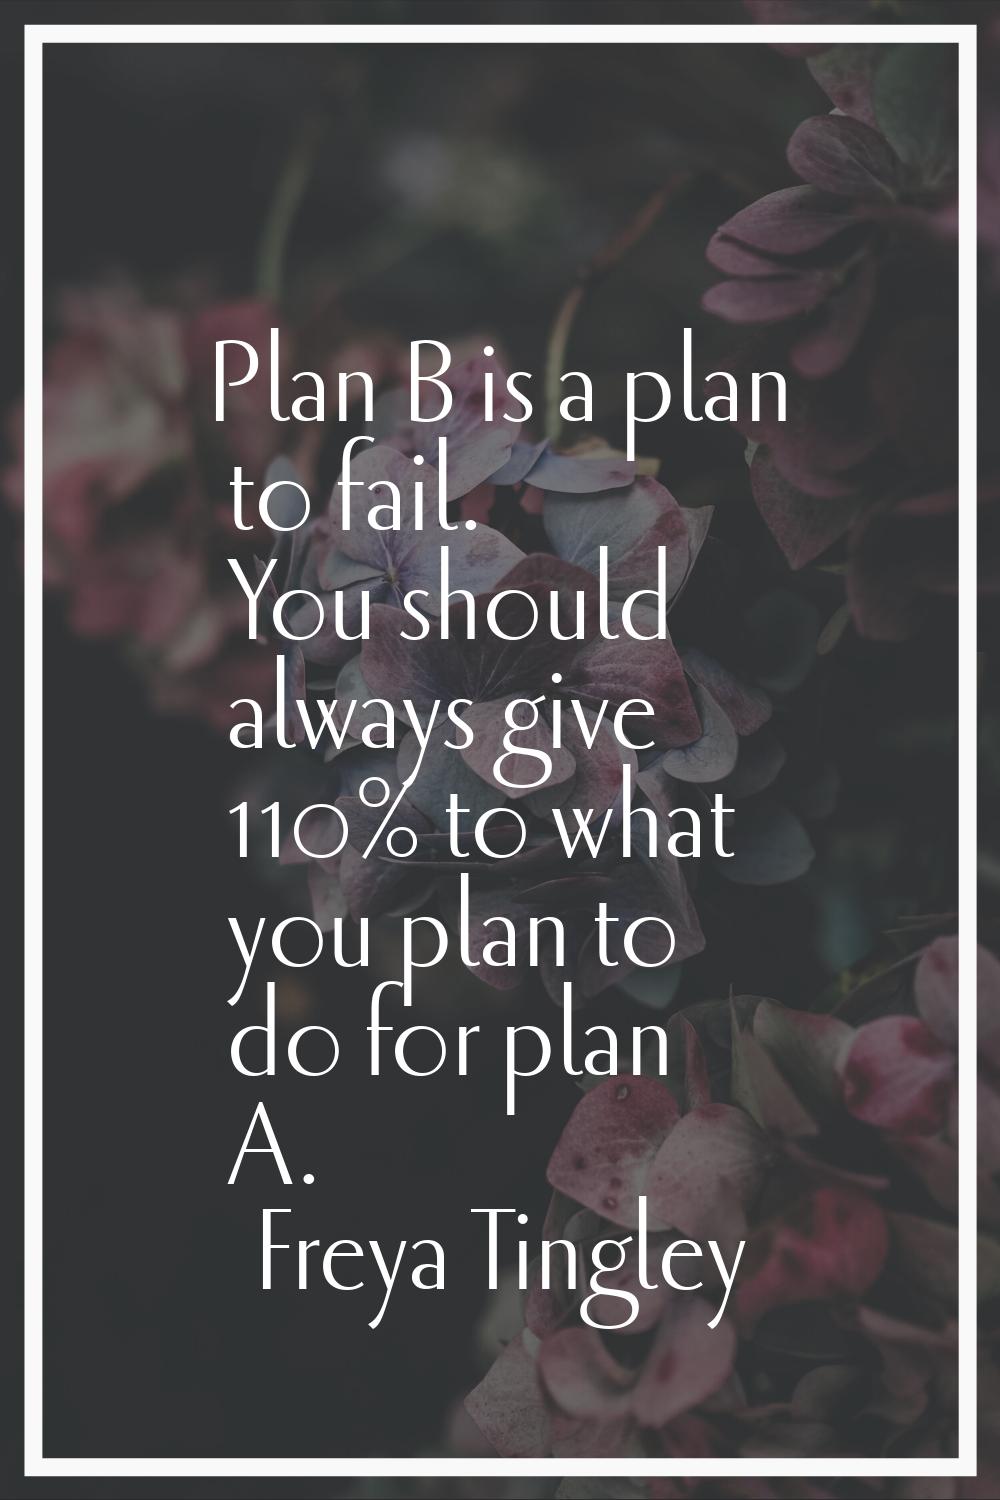 Plan B is a plan to fail. You should always give 110% to what you plan to do for plan A.